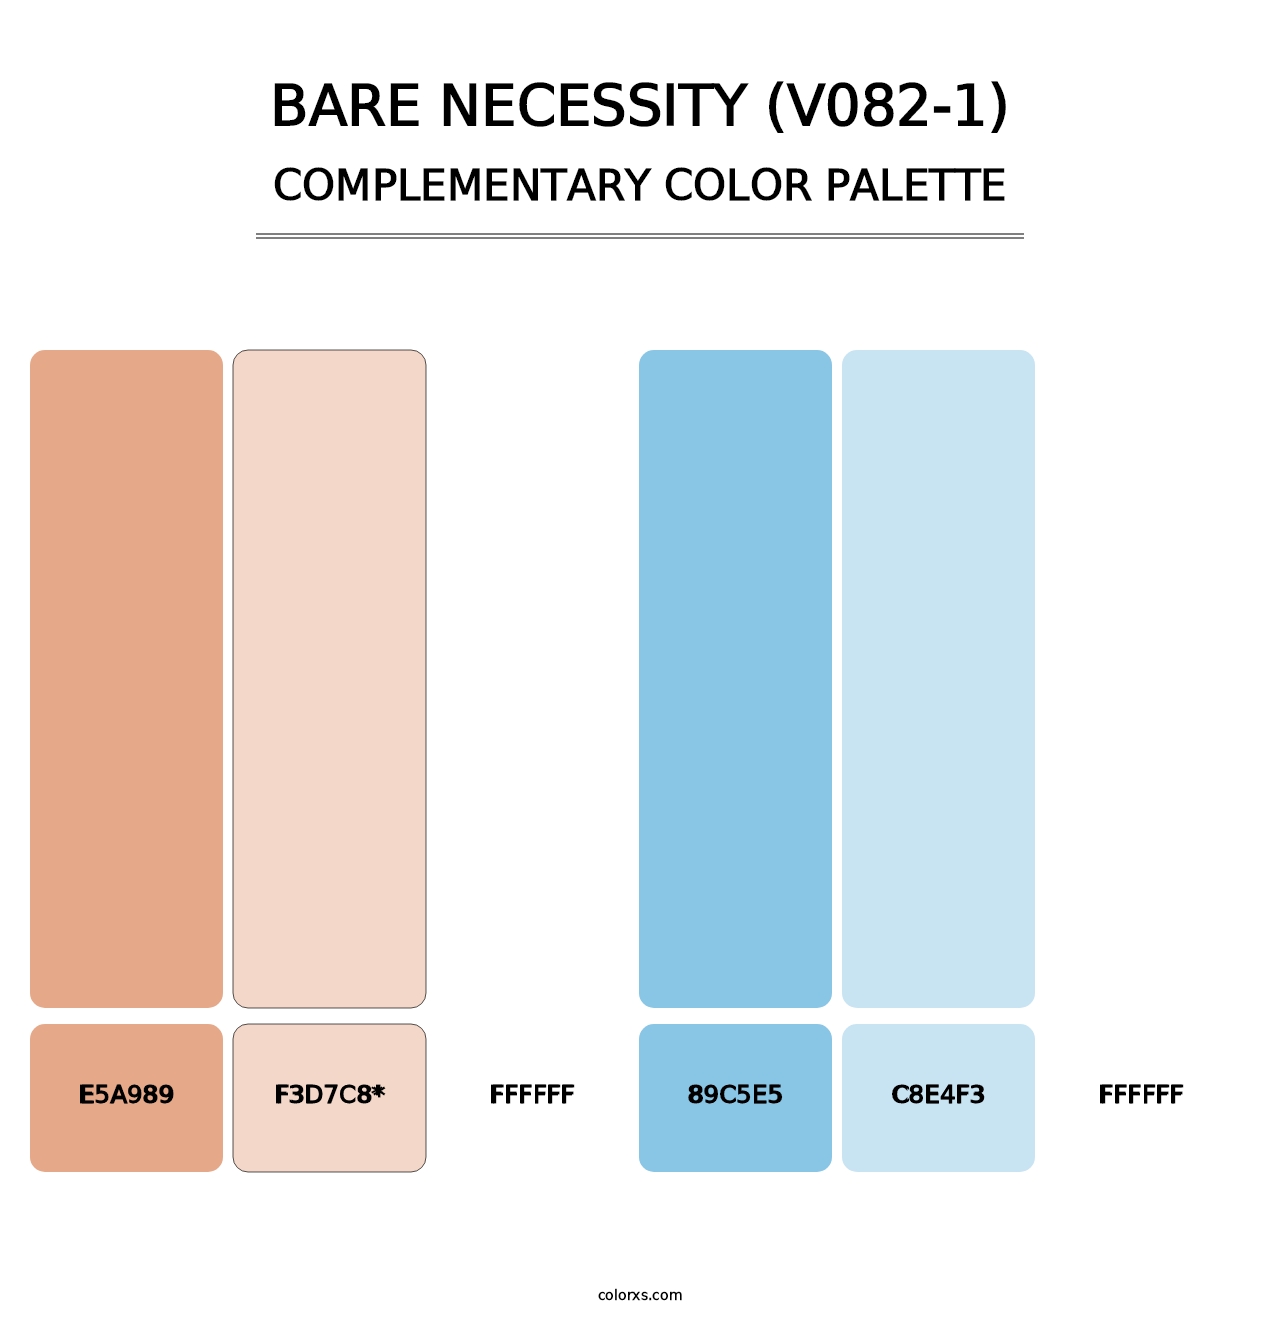 Bare Necessity (V082-1) - Complementary Color Palette